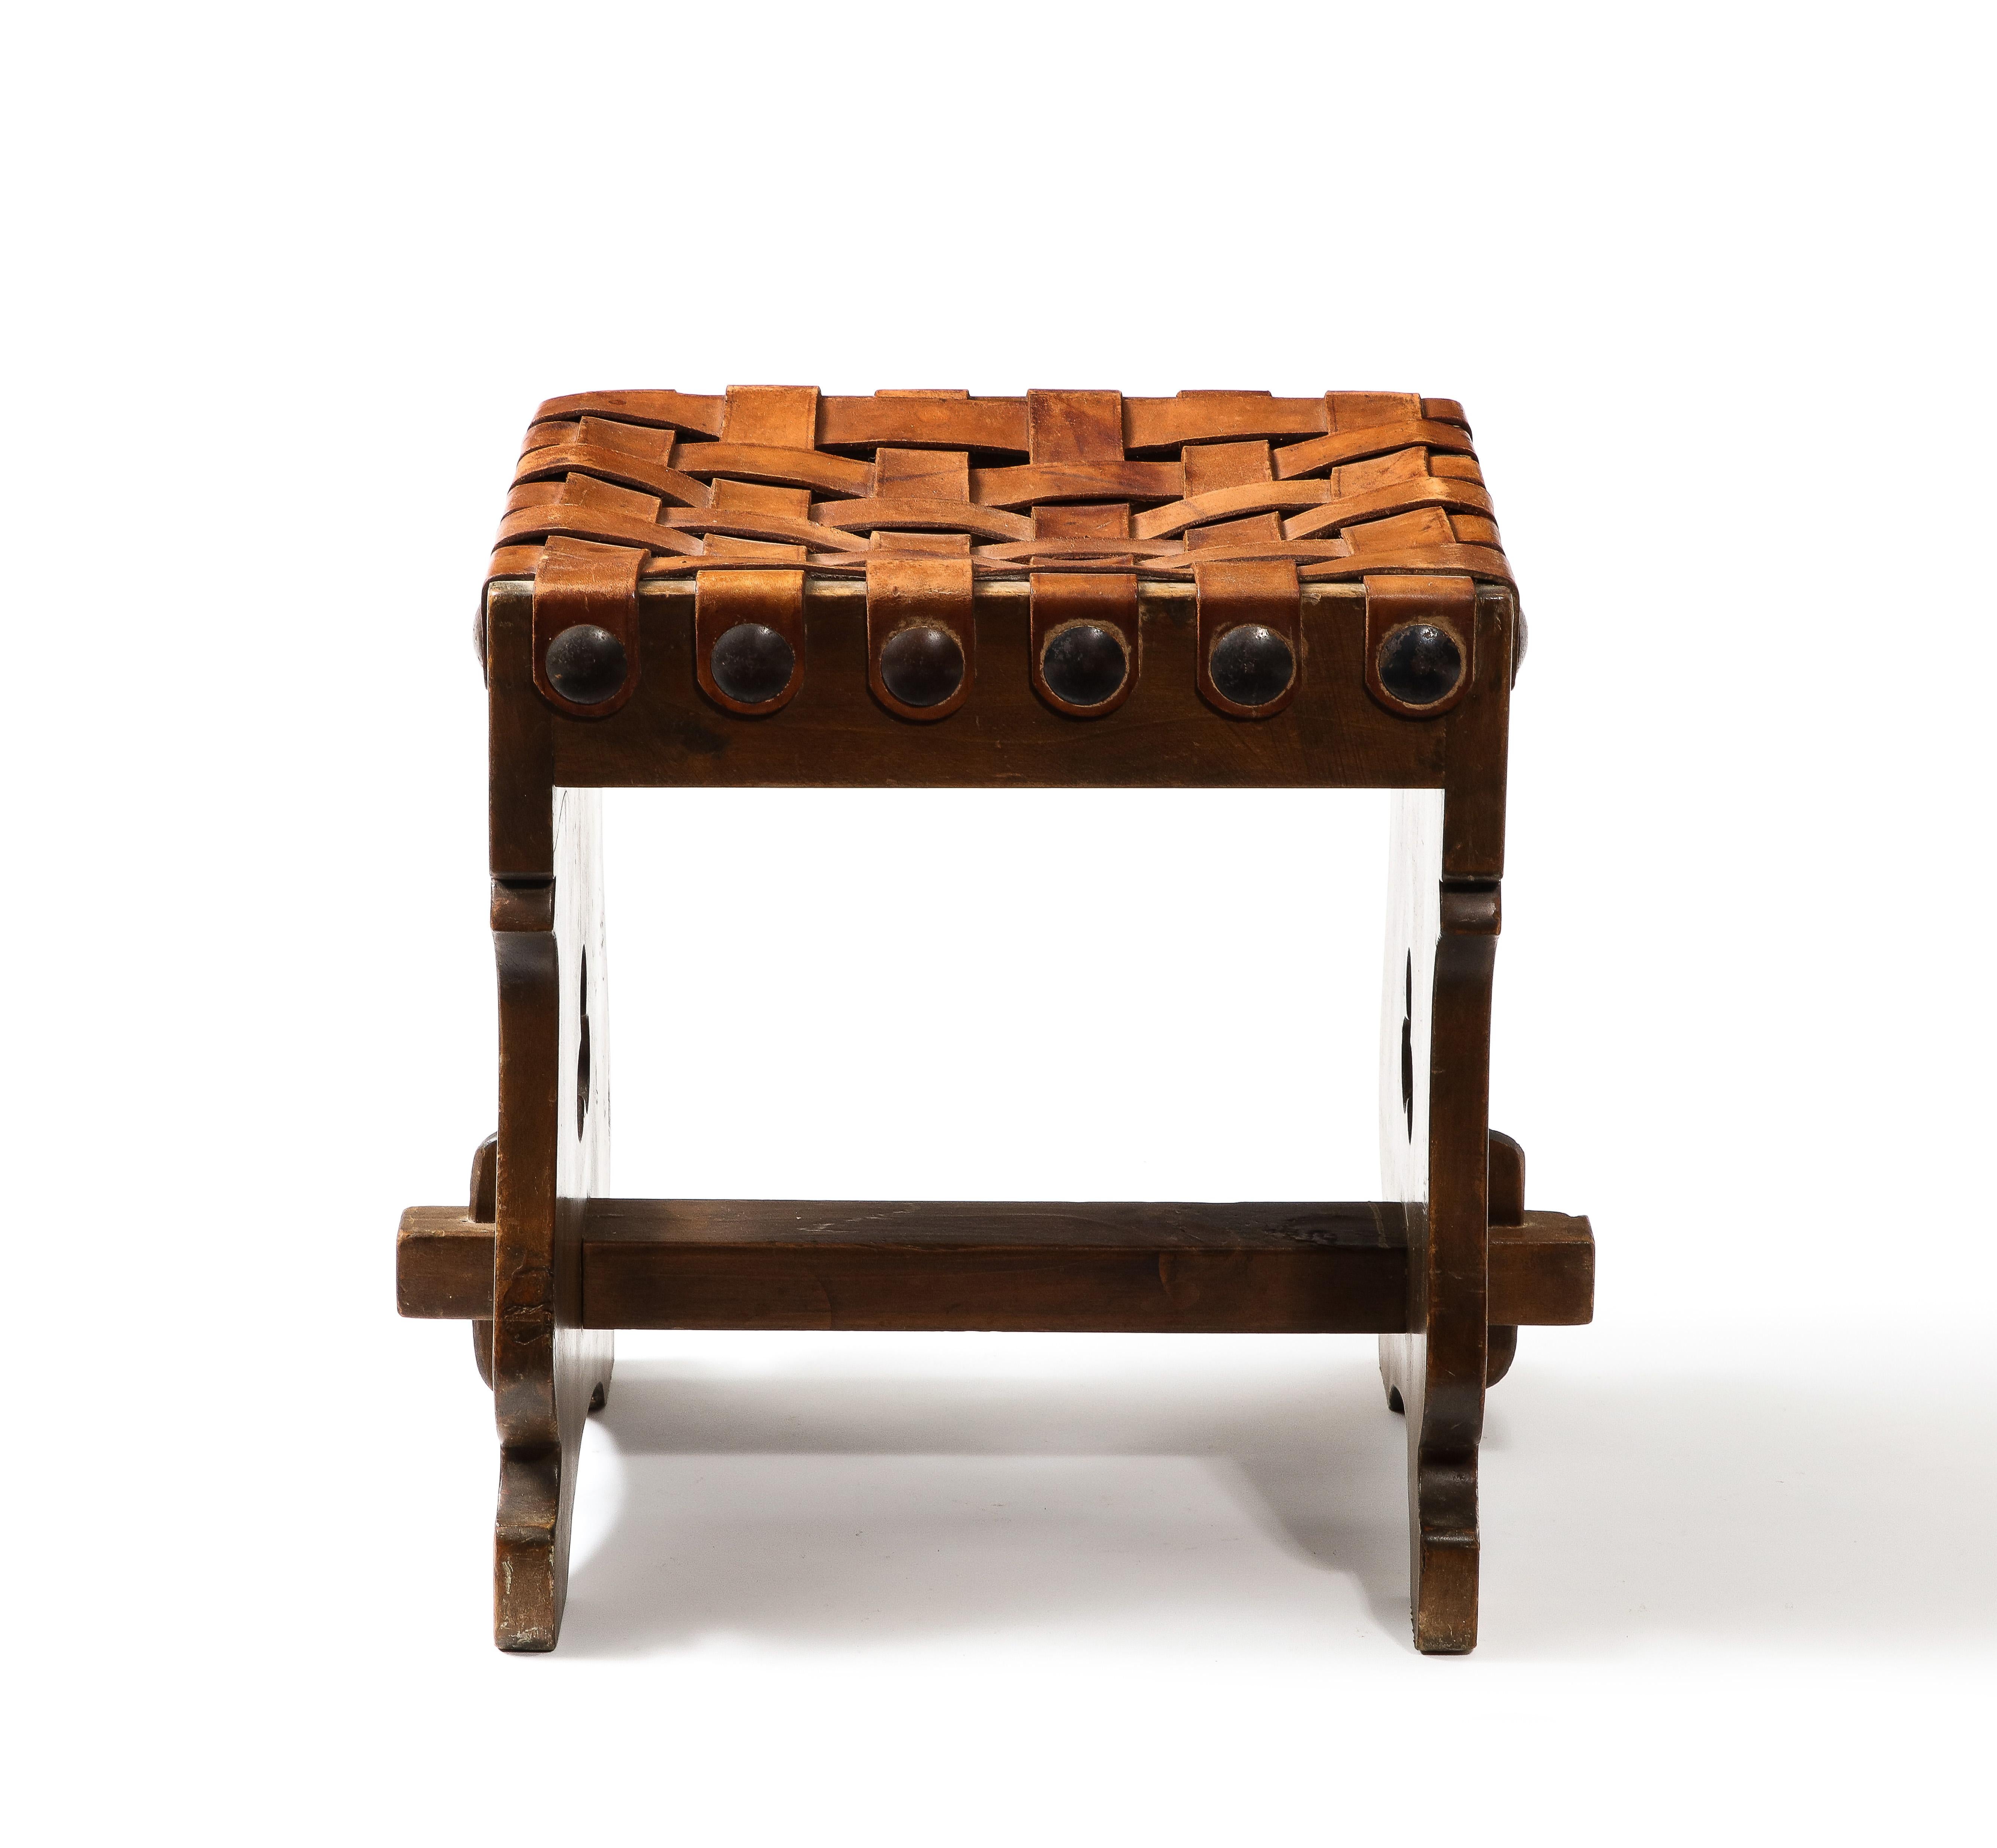 Hand-Woven Large Woven Leather Straps Stool, France 1950’s For Sale